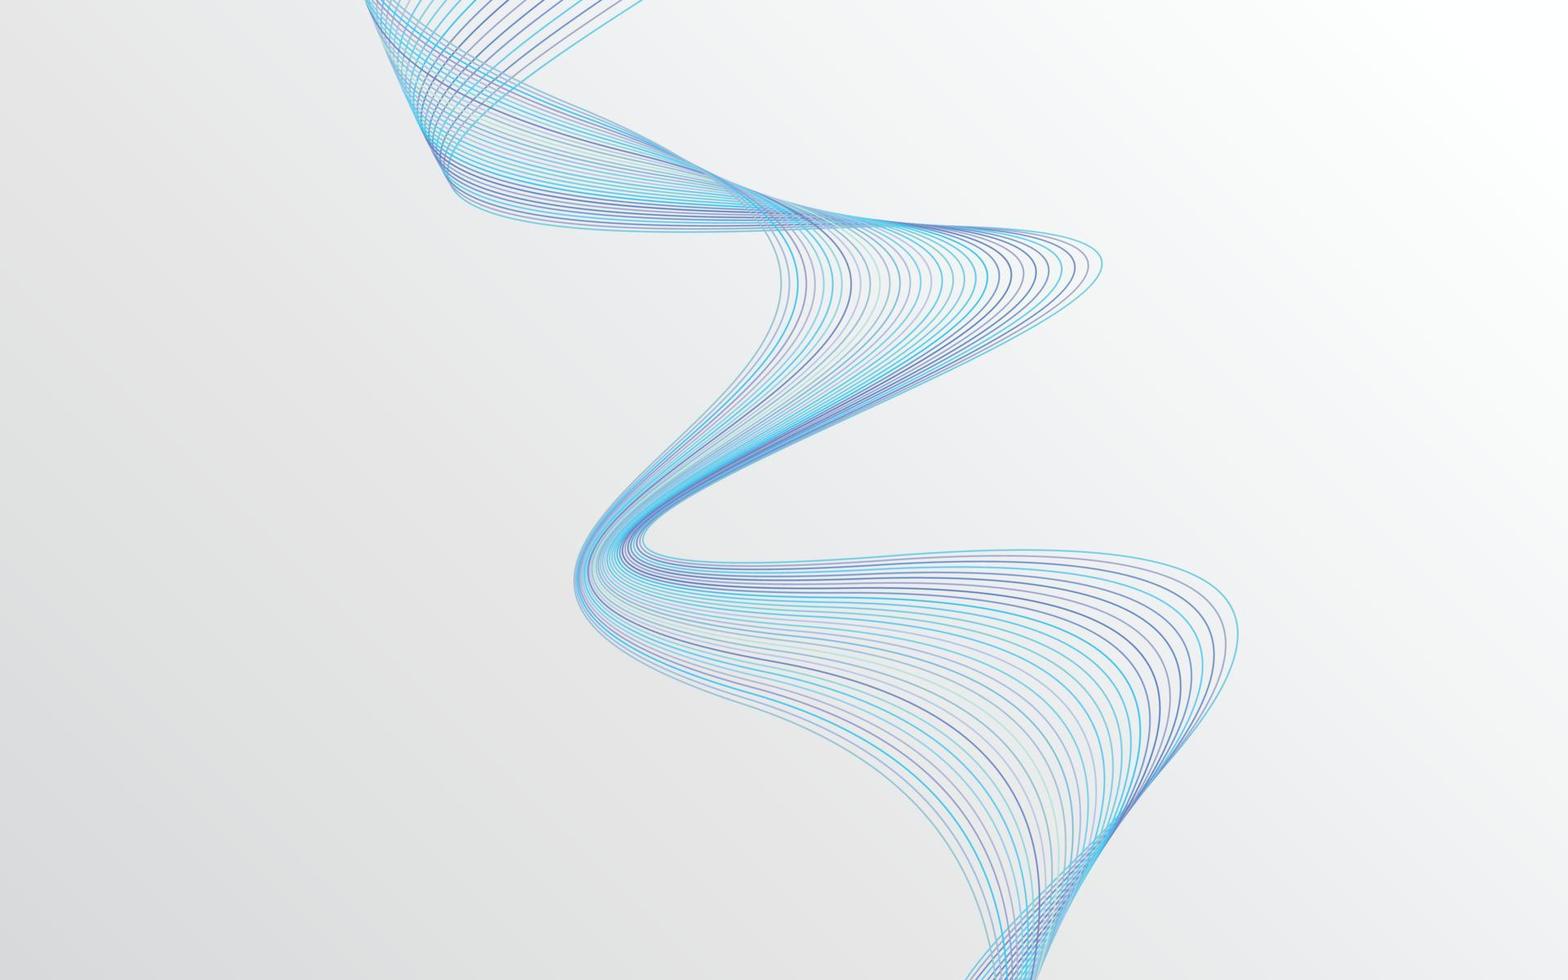 Stylish blue wavy lines abstract background design vector